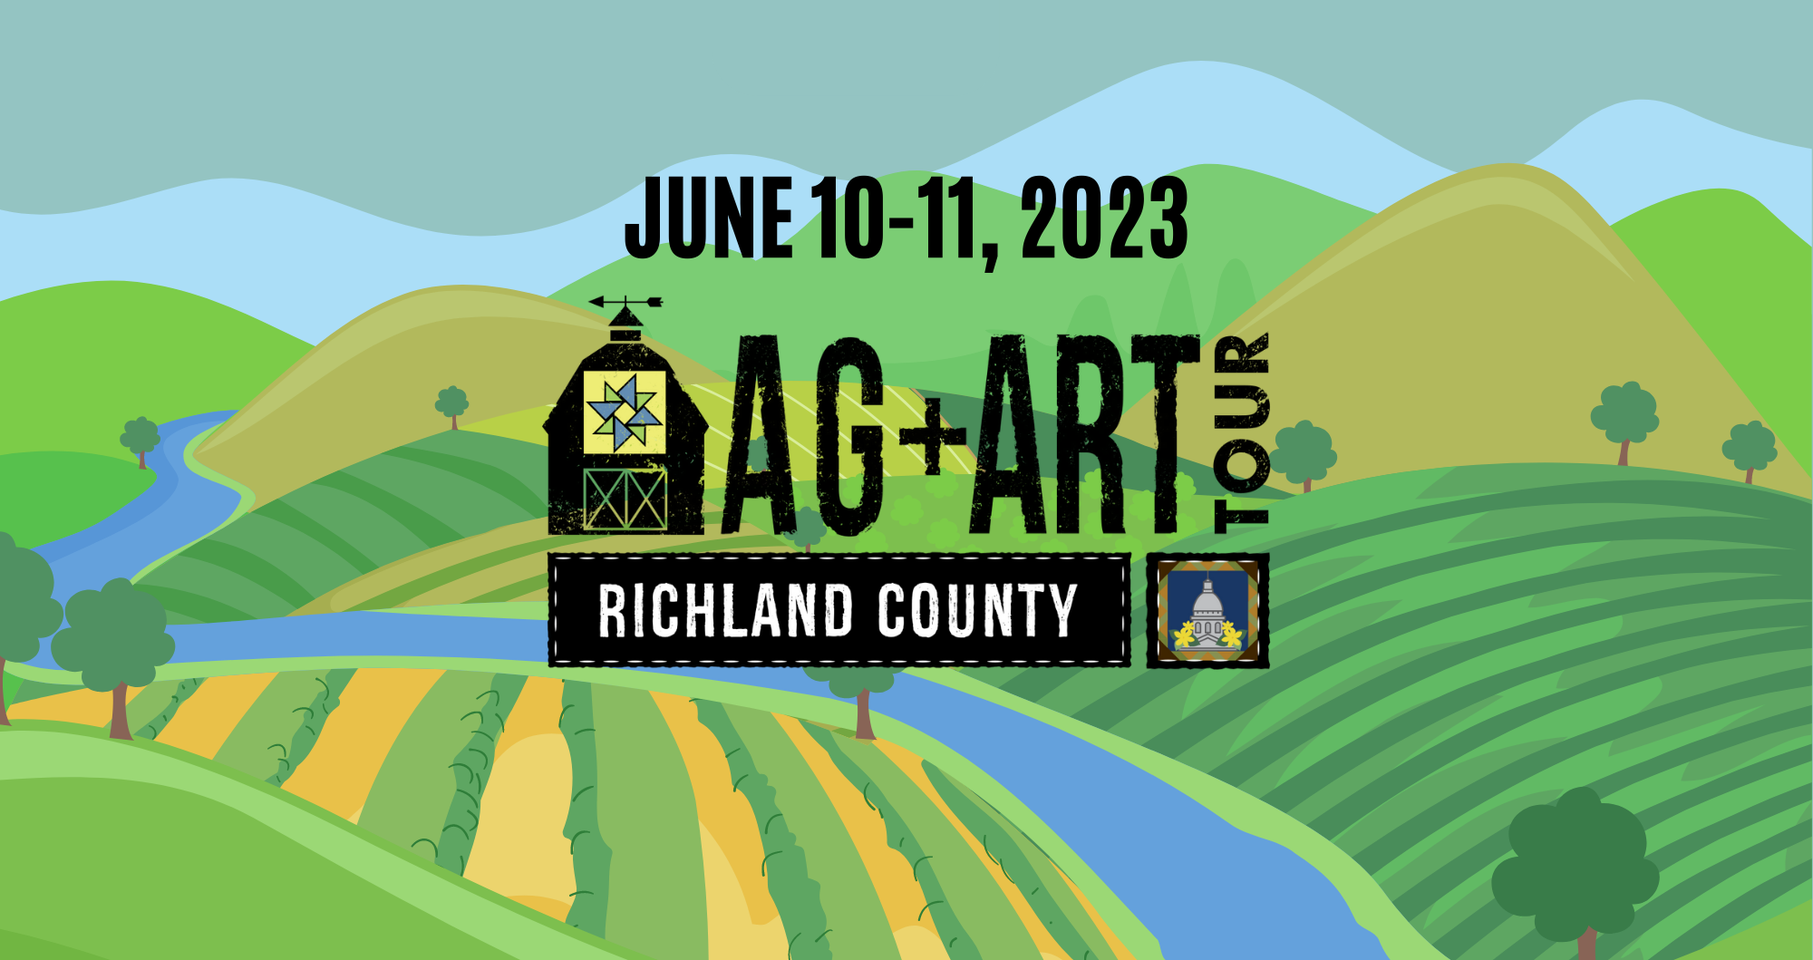 The 2023 Richland County Ag + Art Tour will be held June 10-11, 2023